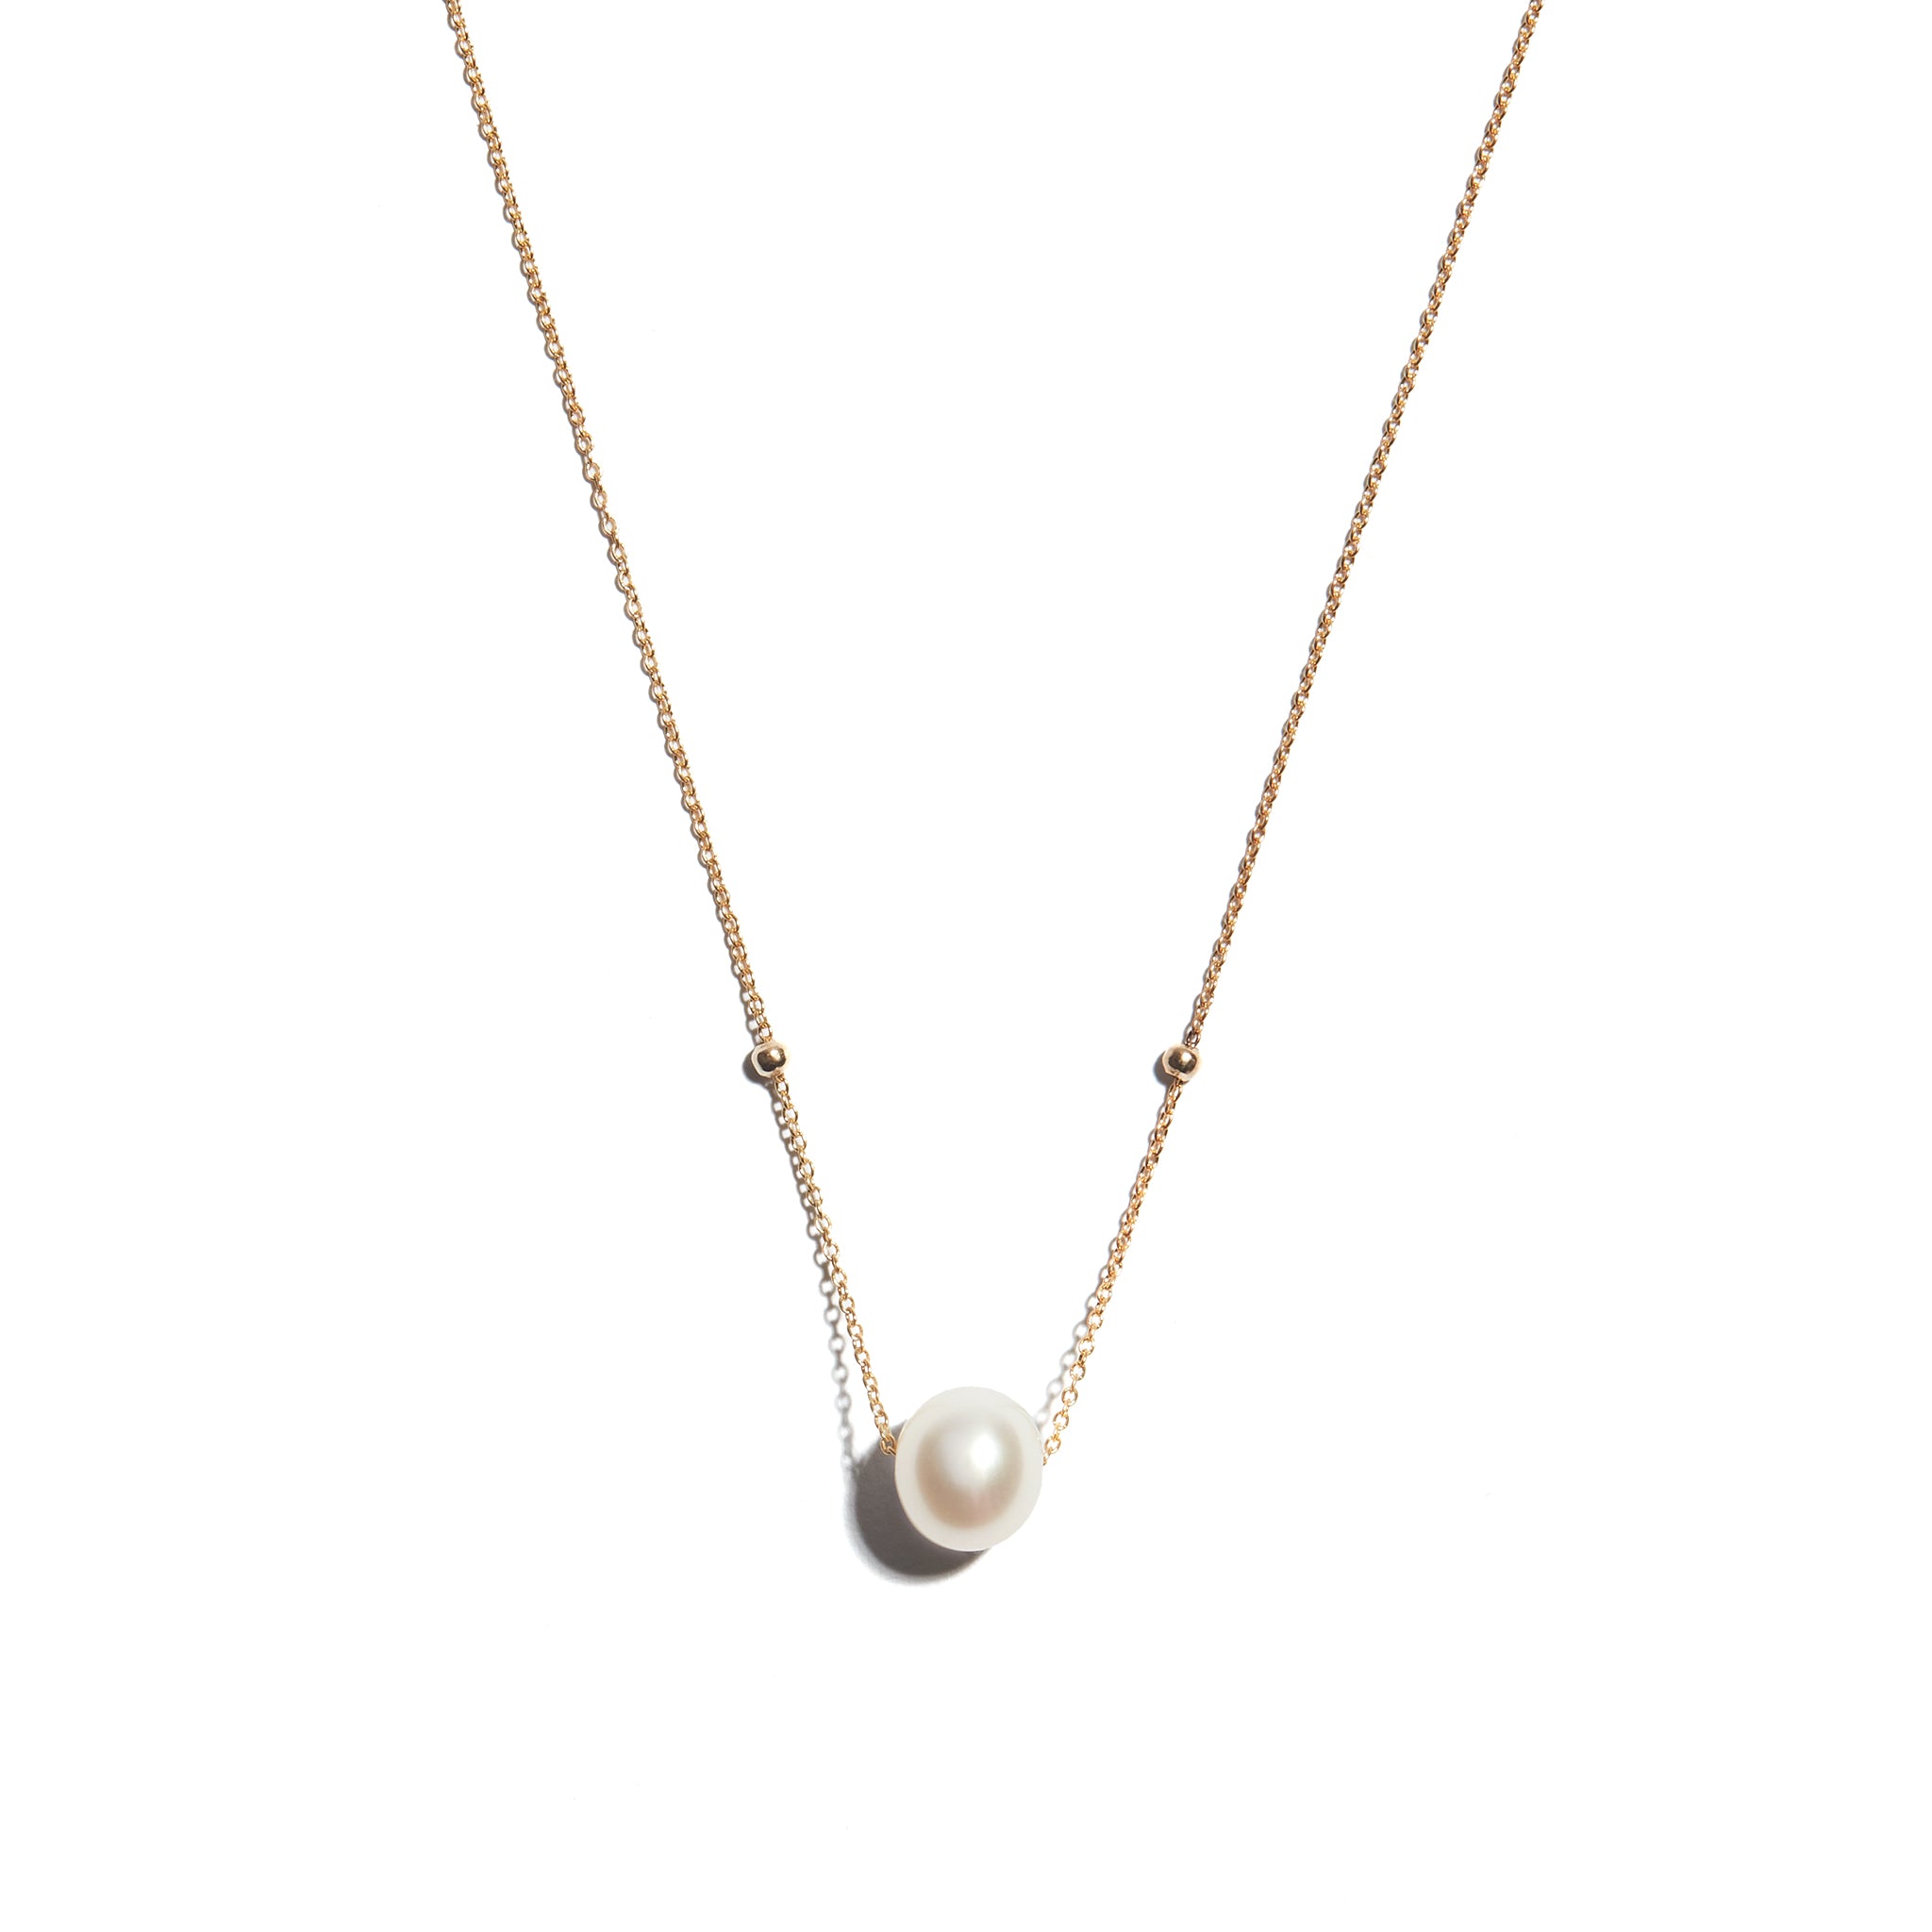 Stunning 9 carat gold pendant featuring a lustrous pearl centerpiece. The exquisite combination of gold and pearl creates a captivating and elegant accessory, perfect for any occasion.